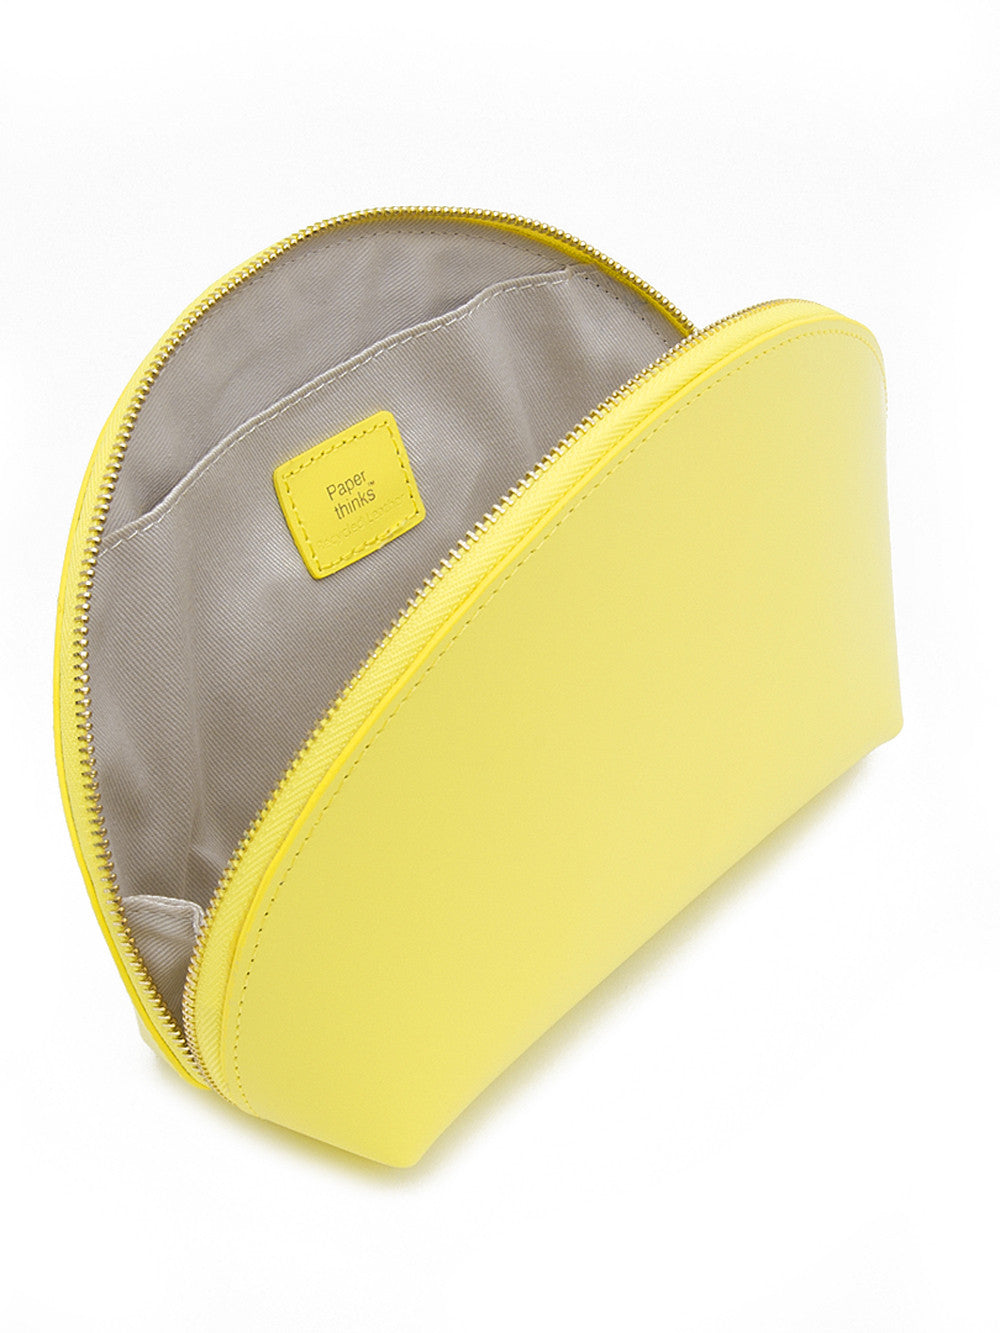 Paperthinks Recycled Leather Cosmetics Pouch - Limone - Paperthinks.us